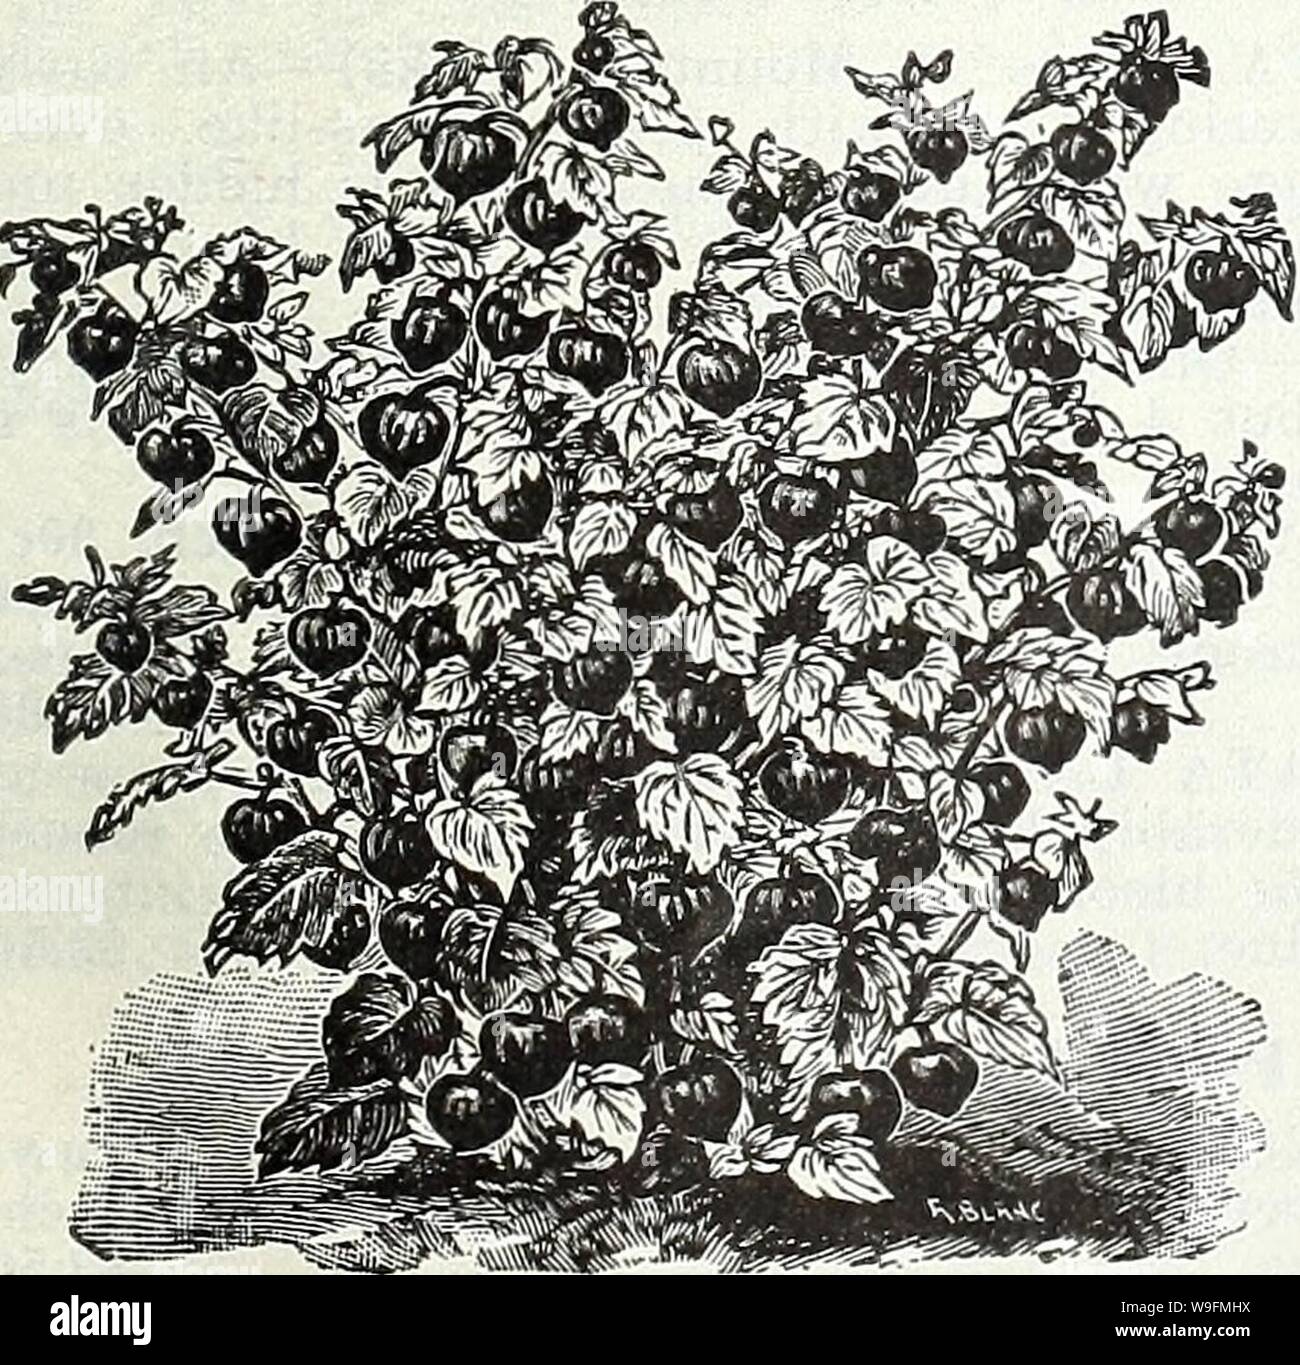 Archive image from page 54 of Currie's garden annual  spring,. Currie's garden annual : spring, 1935 60th year  curriesgardenann19curr 1 Year: 1935 ( CURRIE BROTHERS CO., MILWAUKEE, WIS, Page 51 MONARDA (Bergamot) DIDYMA, CAMBRIDGE SCARLET (Oswego Tea)—Brilliant crimson-scarlet. ROSEA (Bee Balm)—Deep rose colored. VIOLACEA—Bright amaranth red. Plants, price, each, 25c; per doz. $2.50 MYOSOTIS (Forget-me-not) OENOTHERA (Evening Primrose) Free-flowering, hardy plants, the flowers opening towards evening and early morning. LAMARCKIANA—Bears spikes of large, bright yellow flowers profusely. Hardy Stock Photo